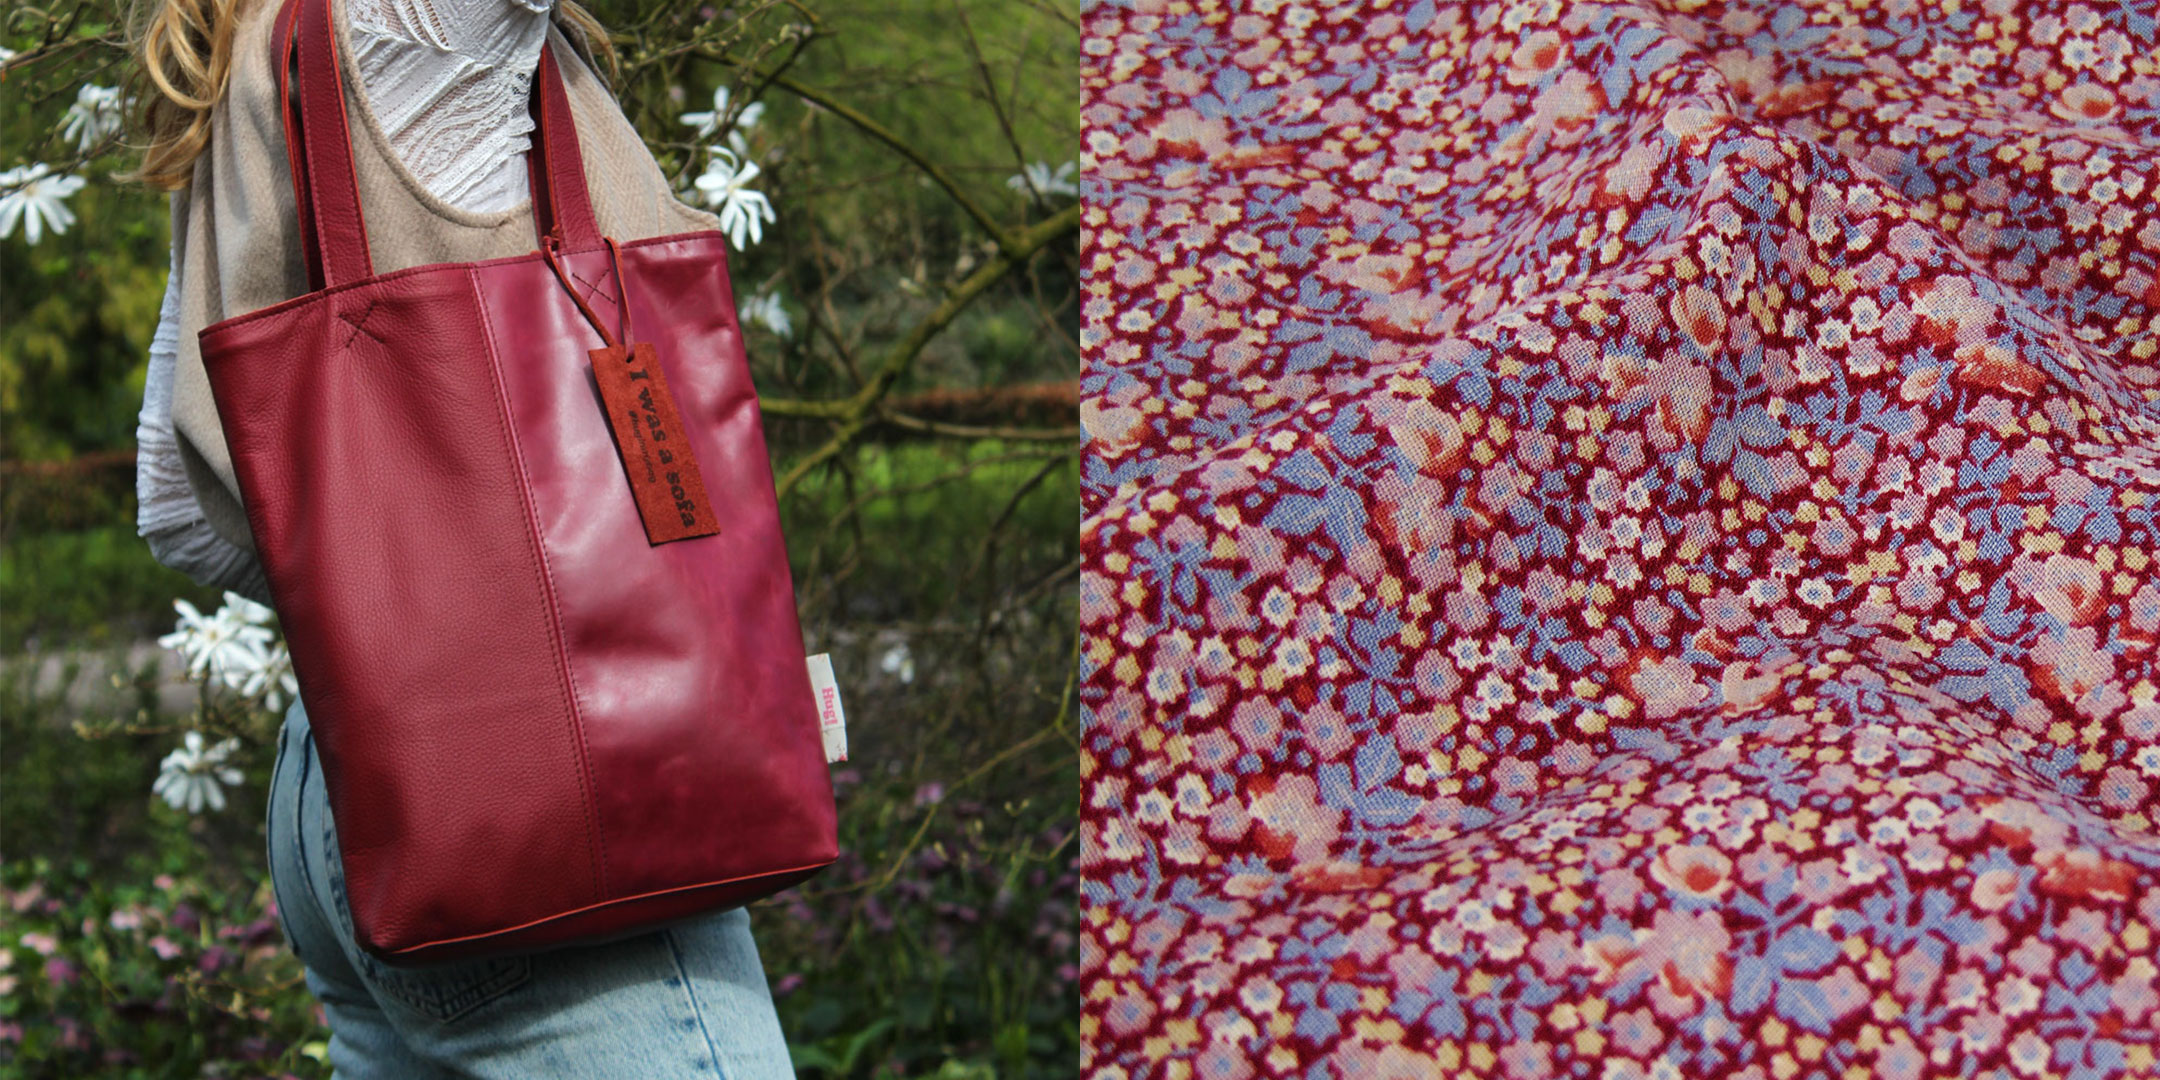 Mix & Match our Very Cherry shopper with our Flower Fiels inner fabric